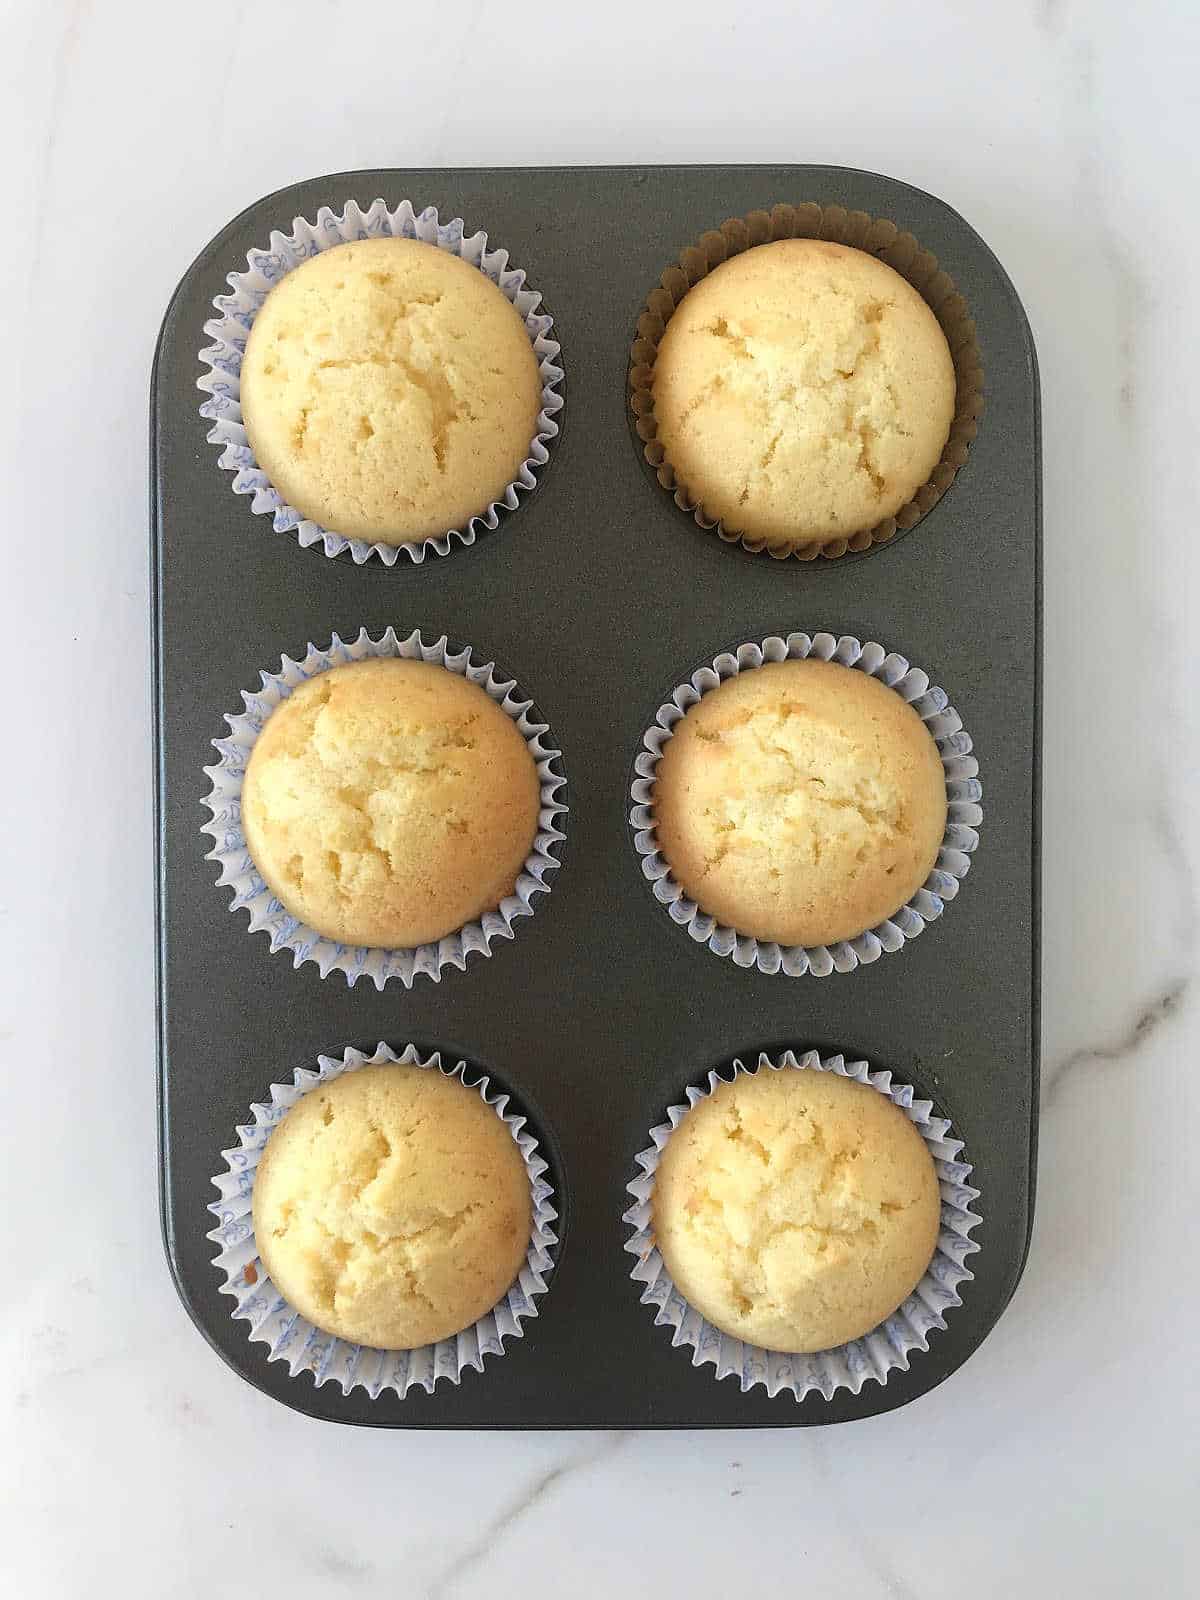 Six baked vanilla cupcakes in a metal muffin pan. White marbled surface.